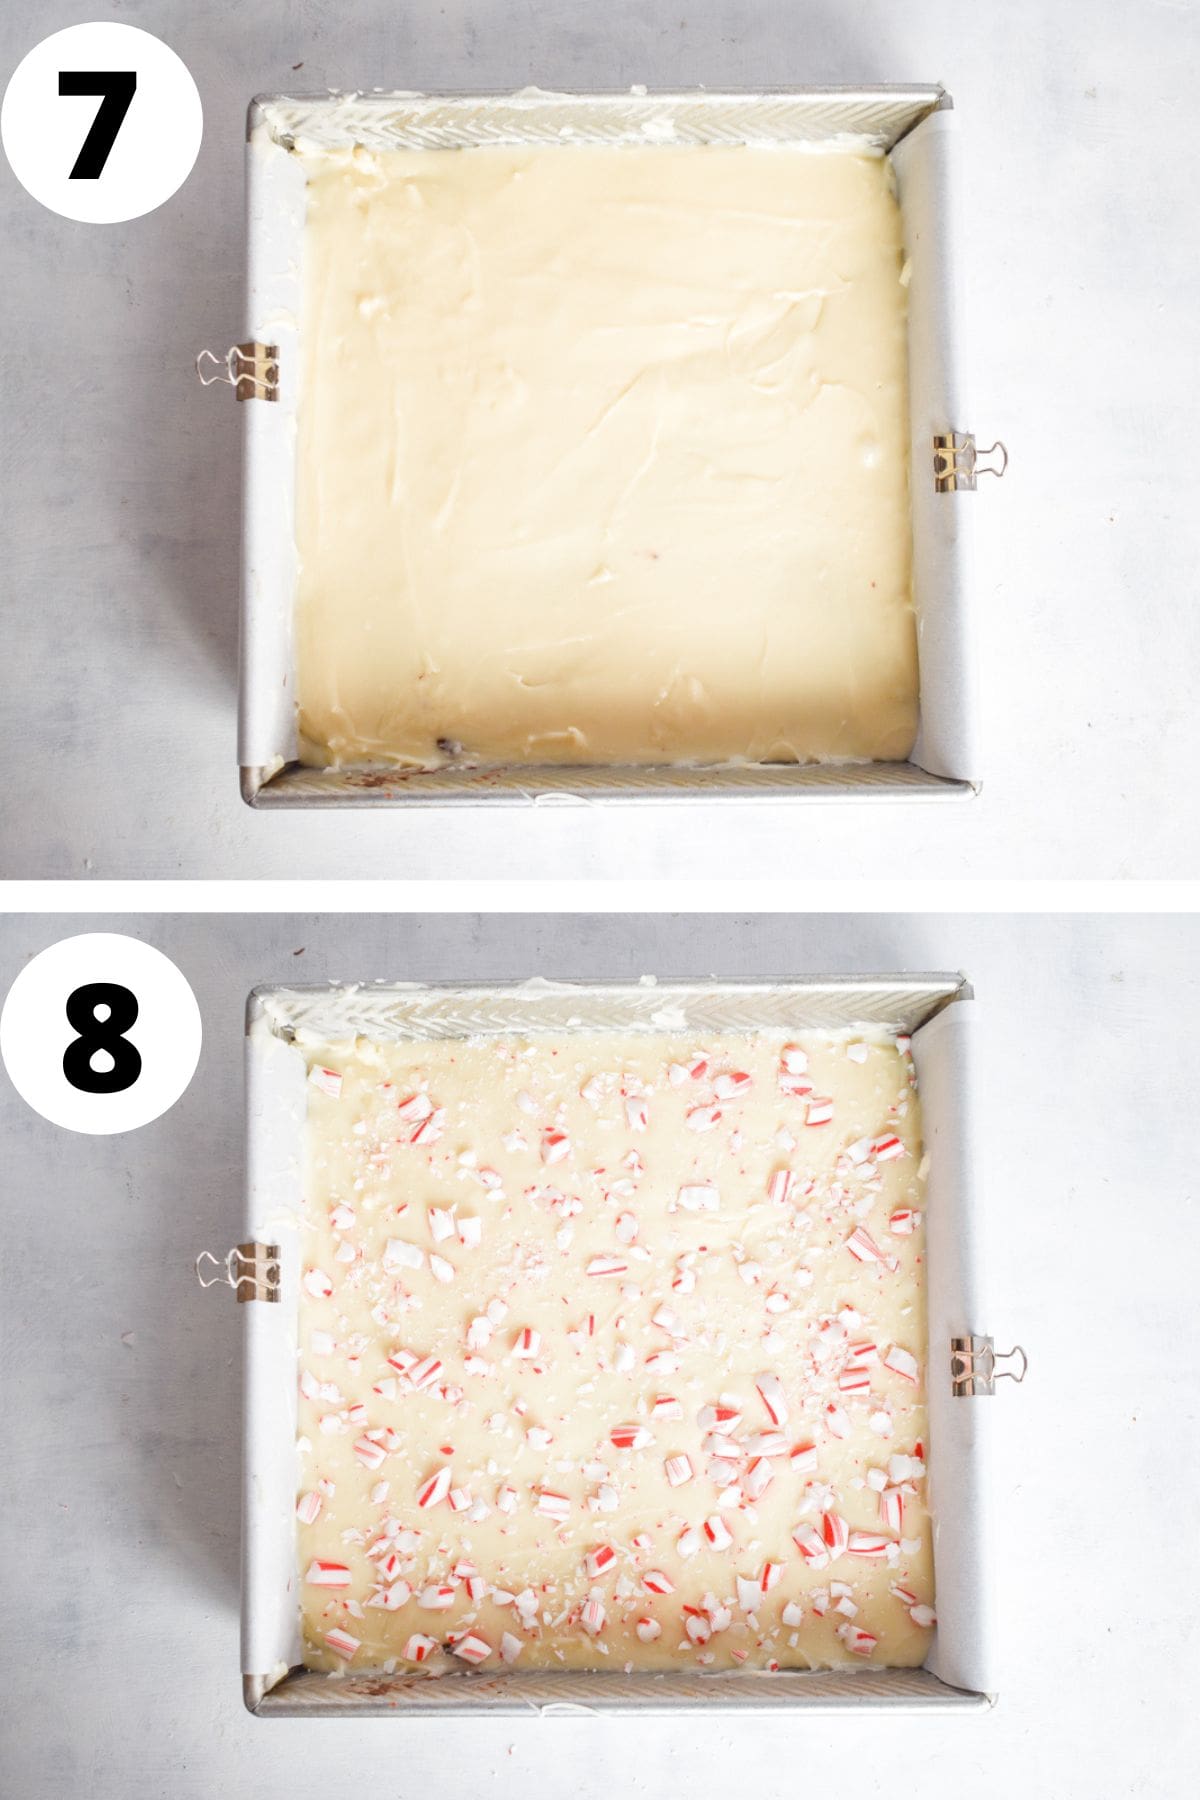 two images showing white chocolate fudge spread over top of chocolate fudge layer and crusted candy cane sprinkled over top. 